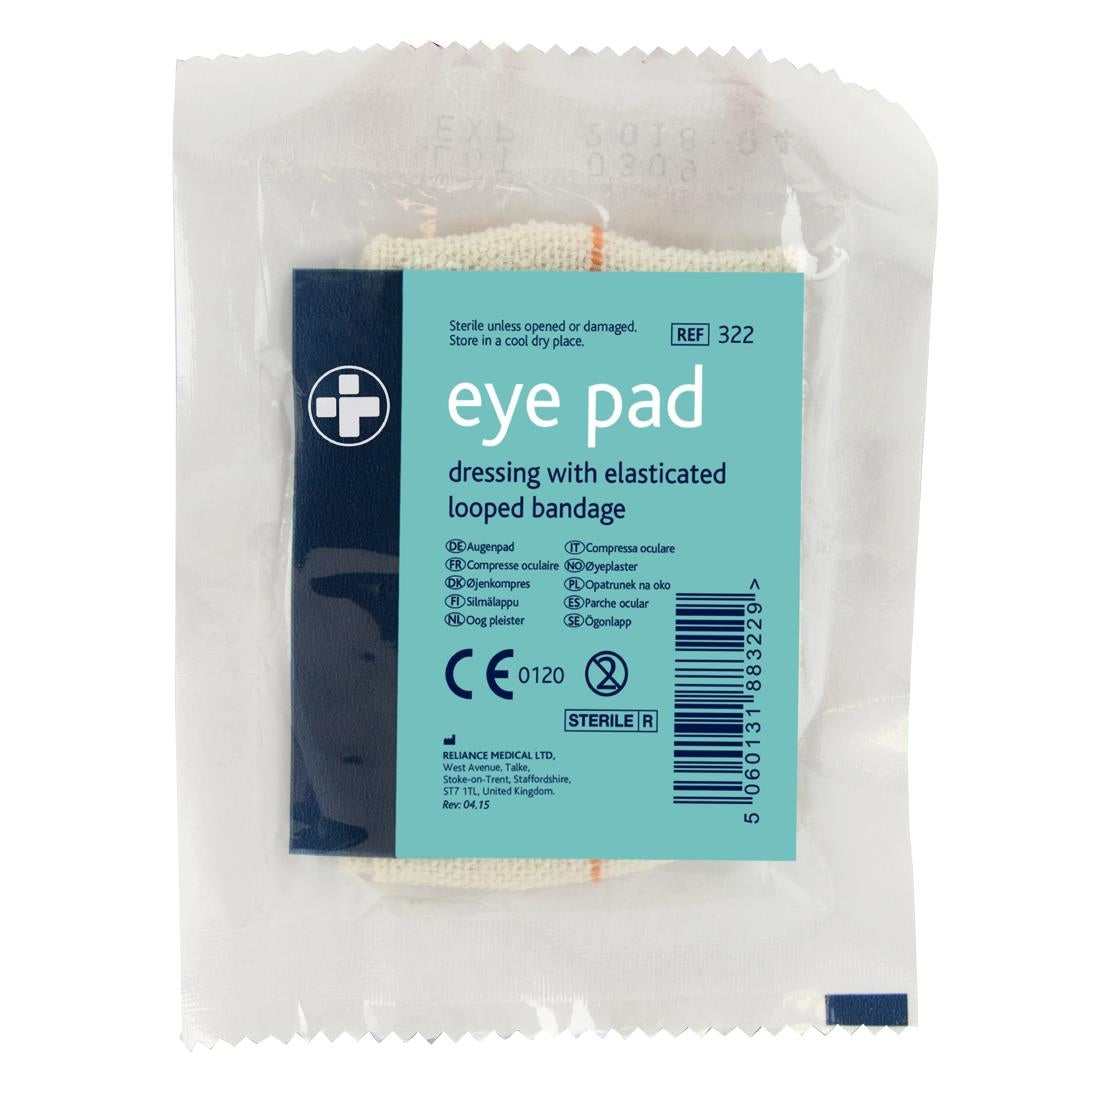 Eye Pad Dressing with Bandage Loop JD Catering Equipment Solutions Ltd